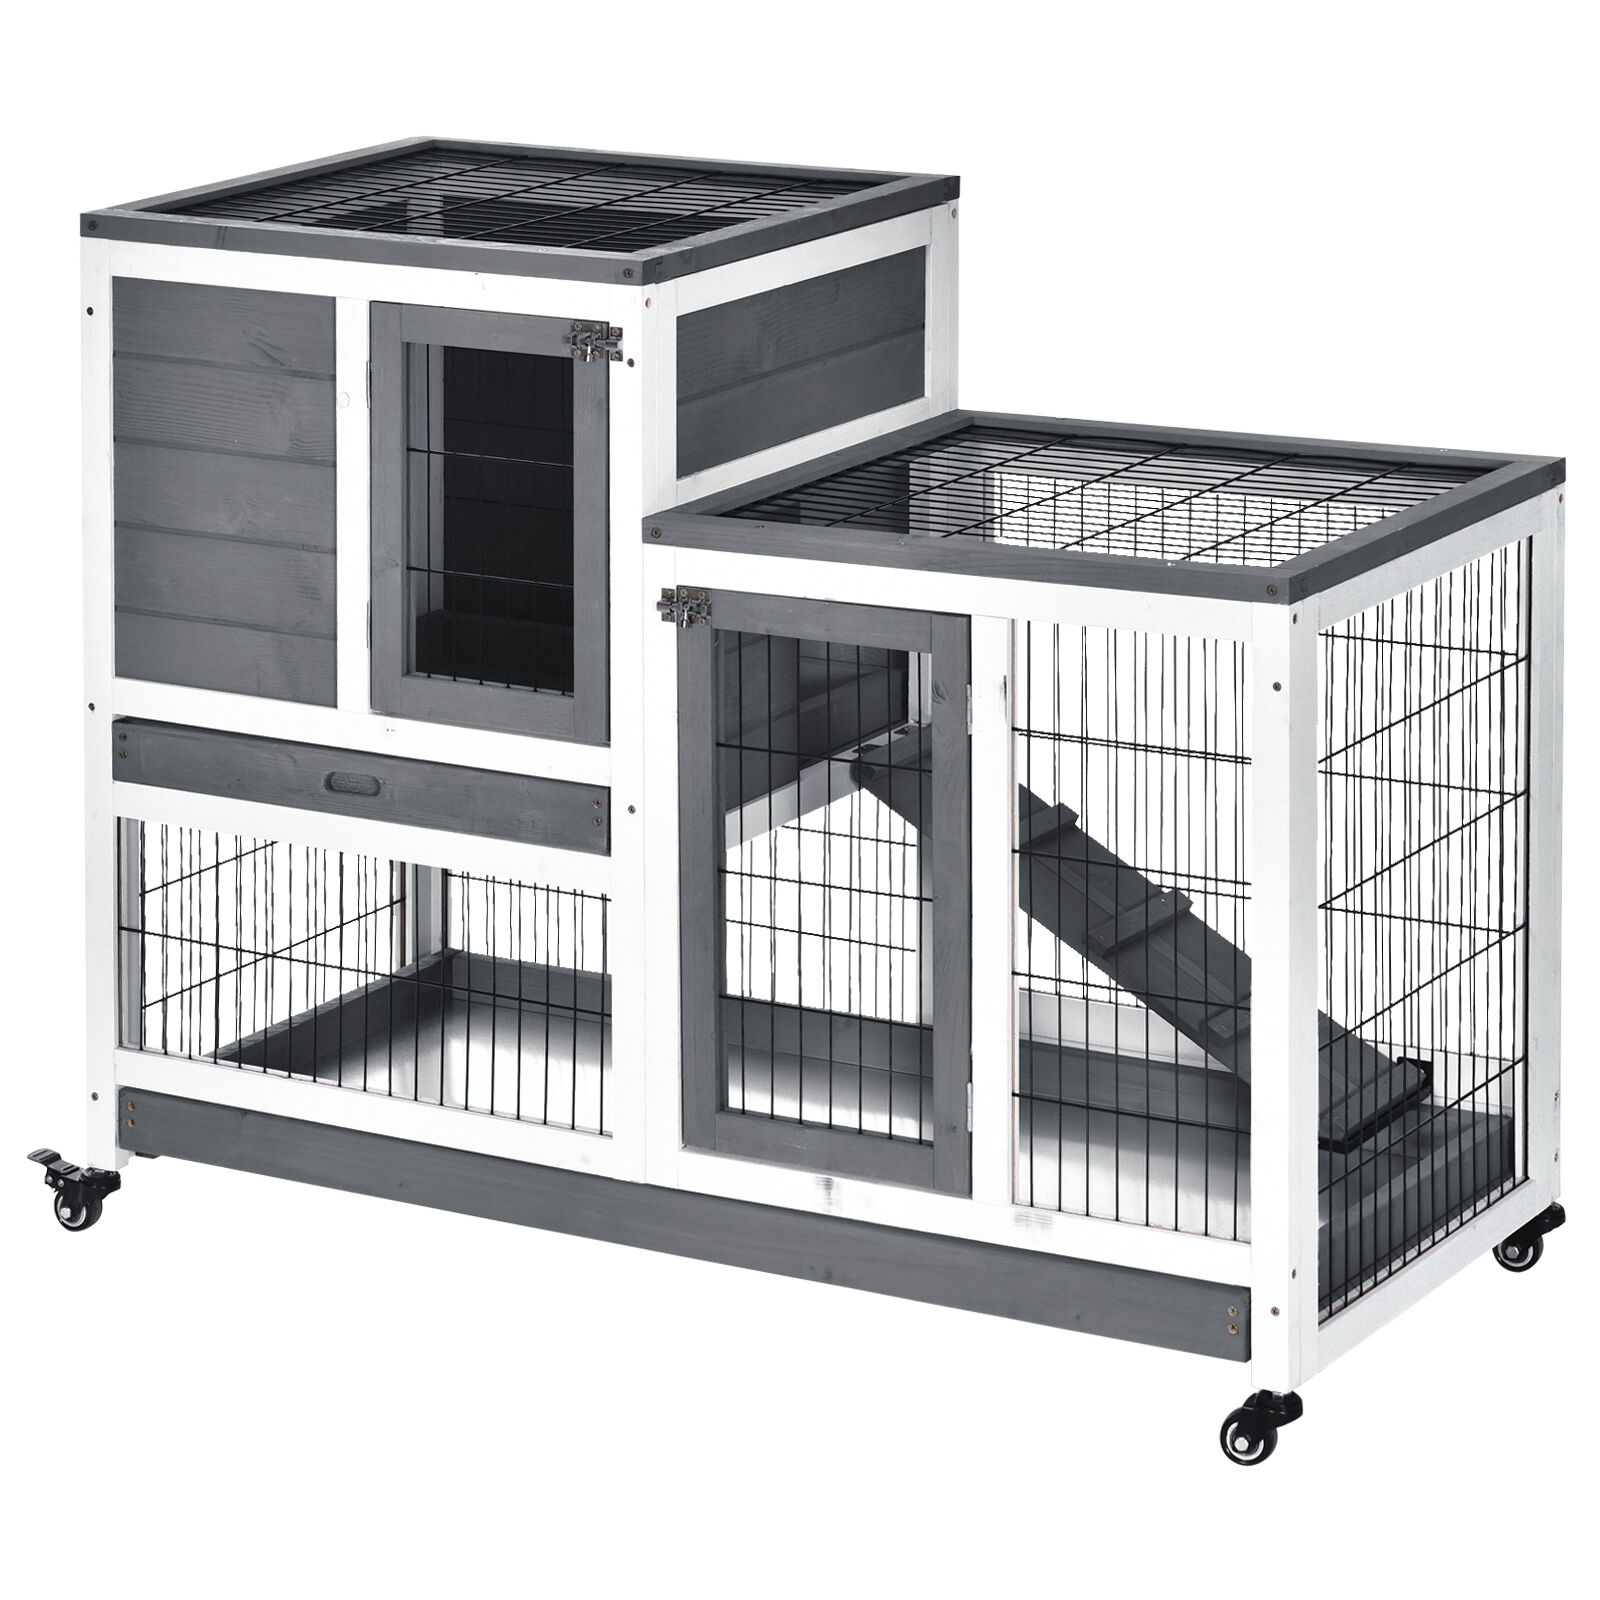 PawHut Bunny Hutch Indoor, Elevated Cage Indoor Rabbit Hutch, with Wheels Ramp Removable Tray, for Guinea Pigs Gray   Aosom.com